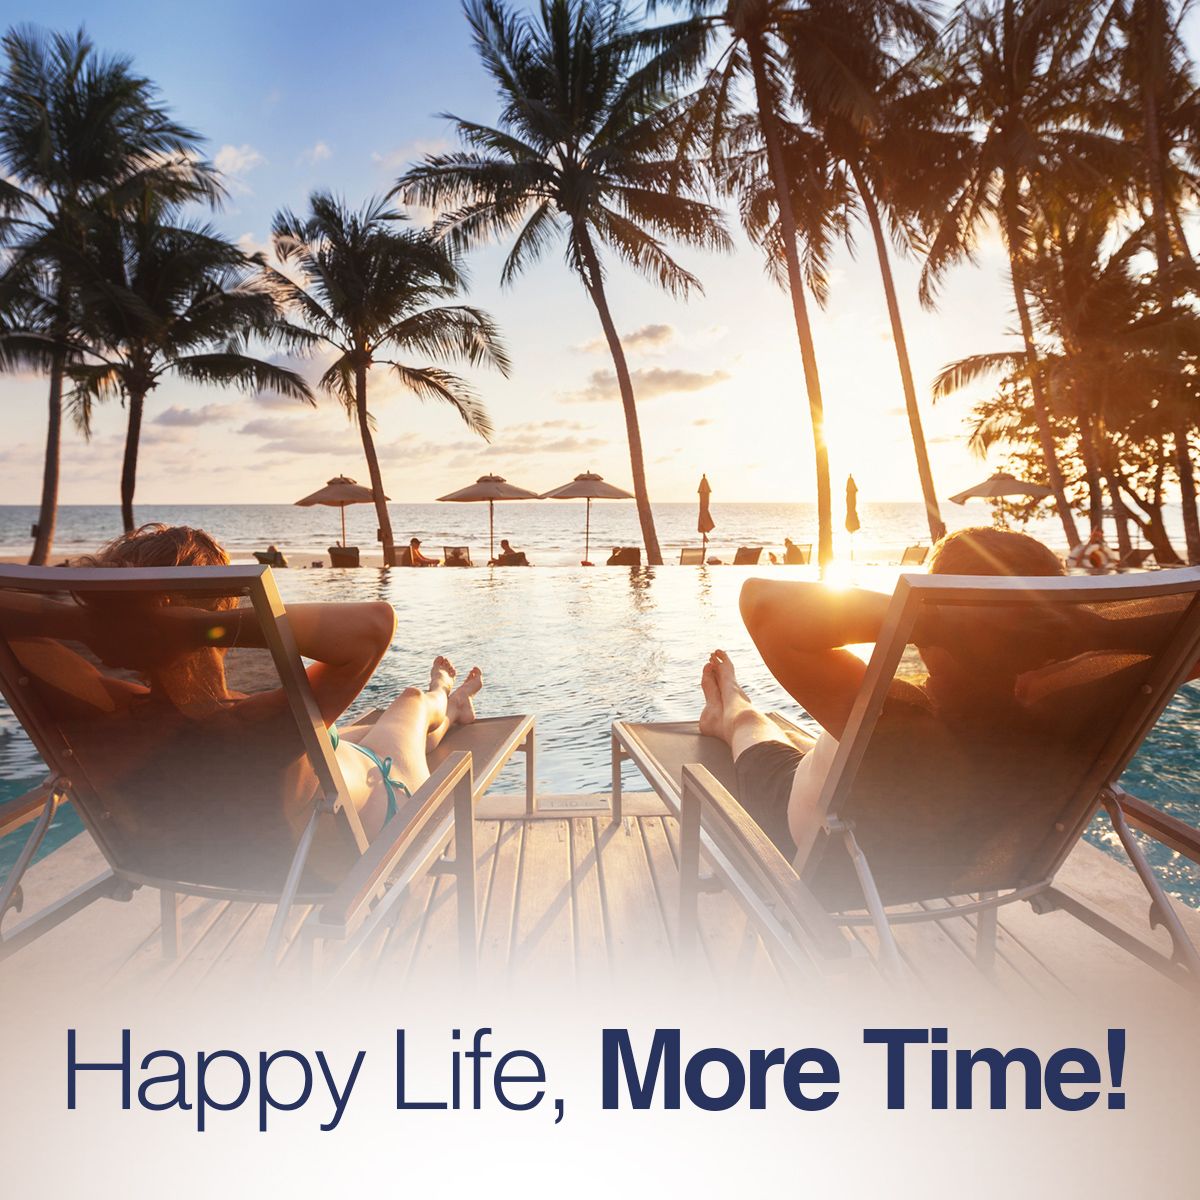 Happy Life, More Time!